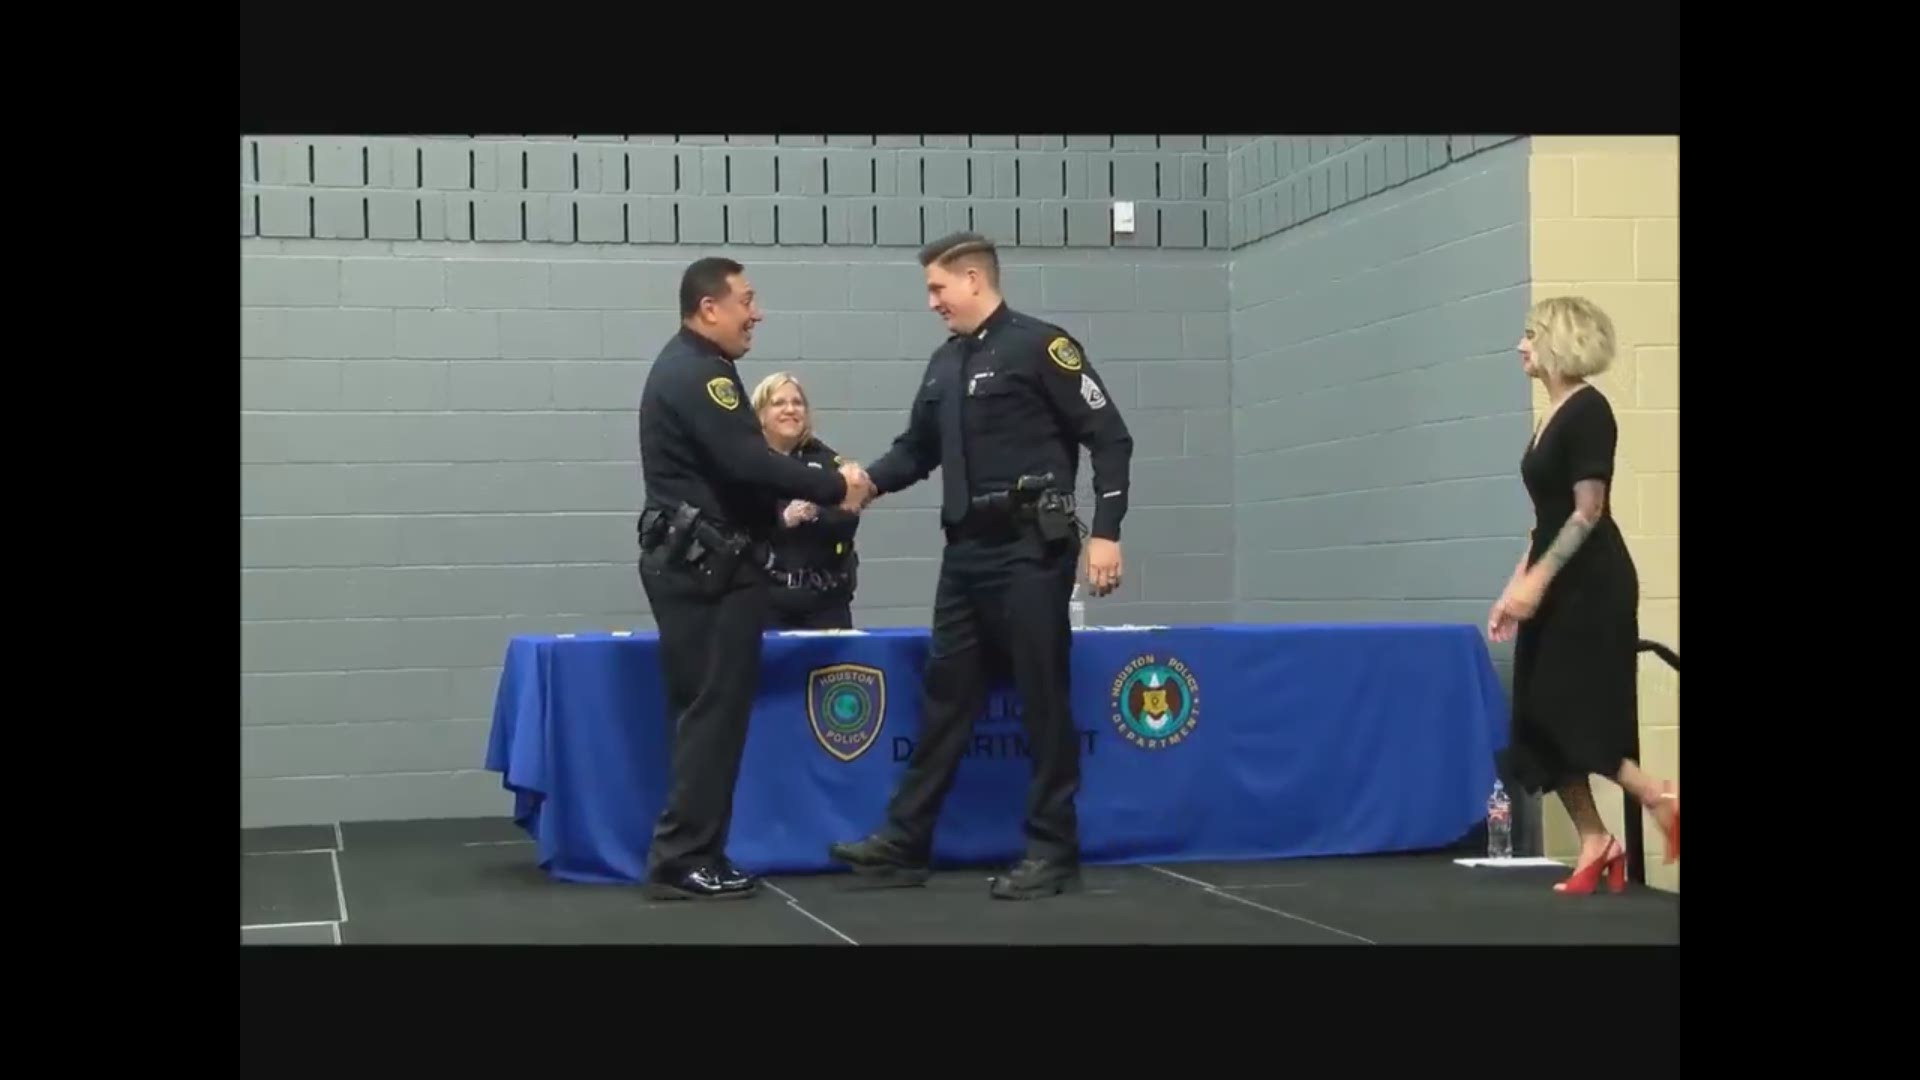 Houston police on Twitter shared this video of Chris Brewster being promoted to sergeant. Ten months later, Brewster was shot and killed in the line of duty